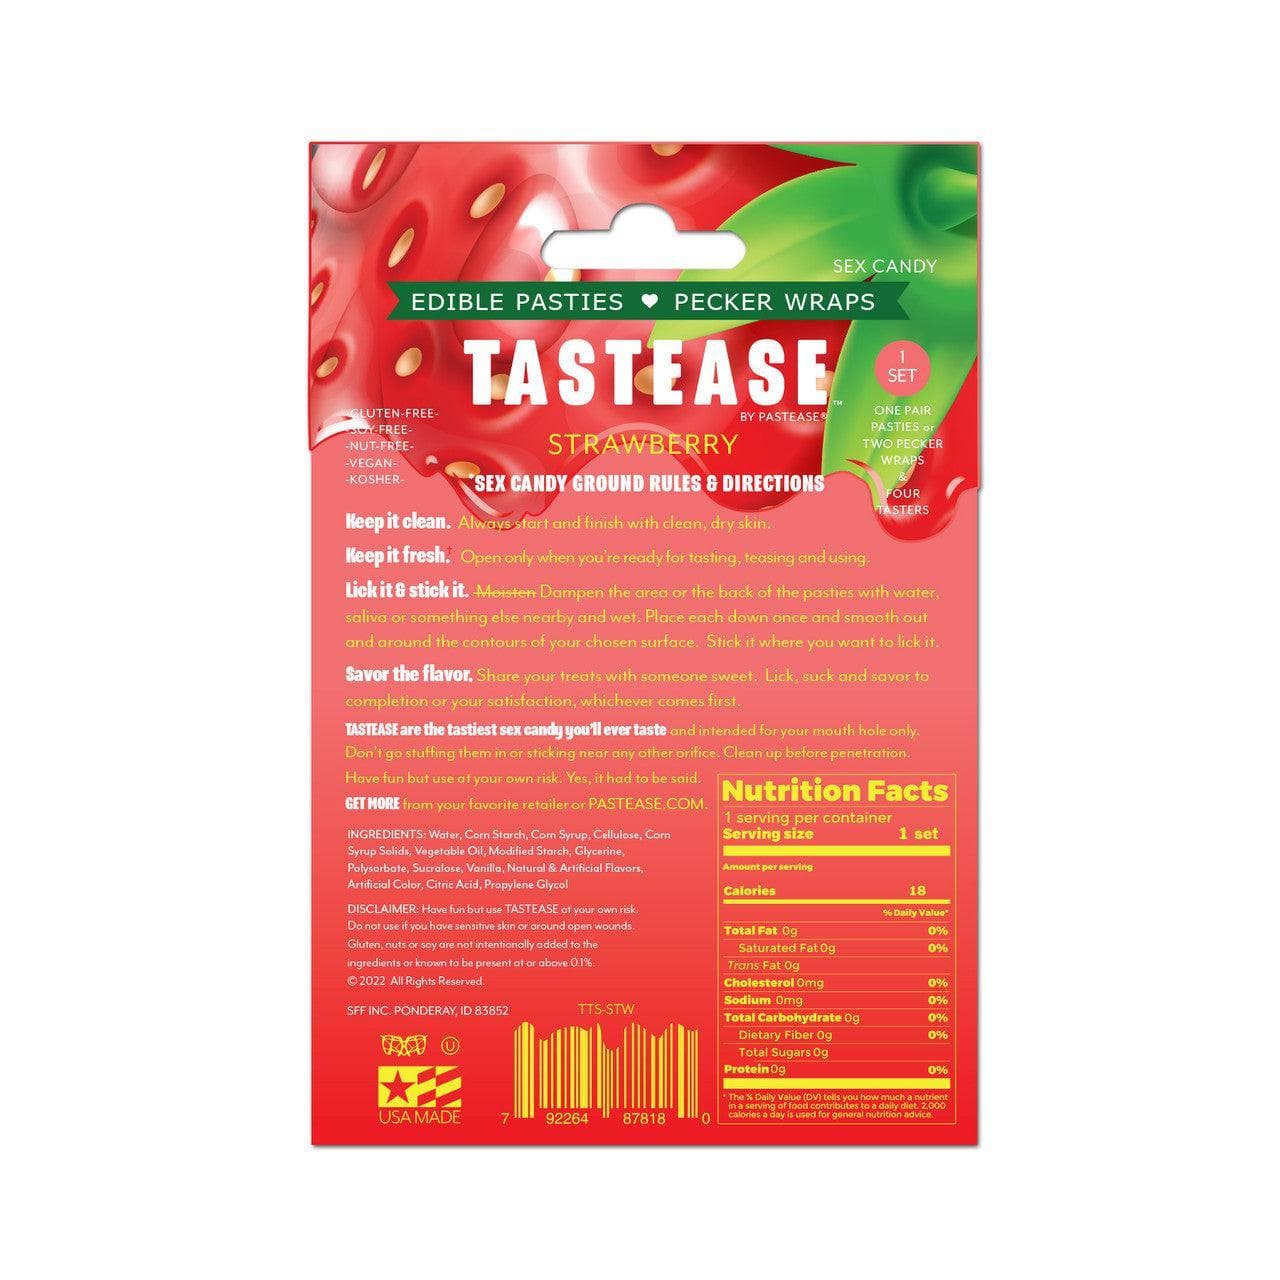 Tastease by Pastease Strawberry Candy Edible Pasties & Pecker Wraps - Romantic Blessings